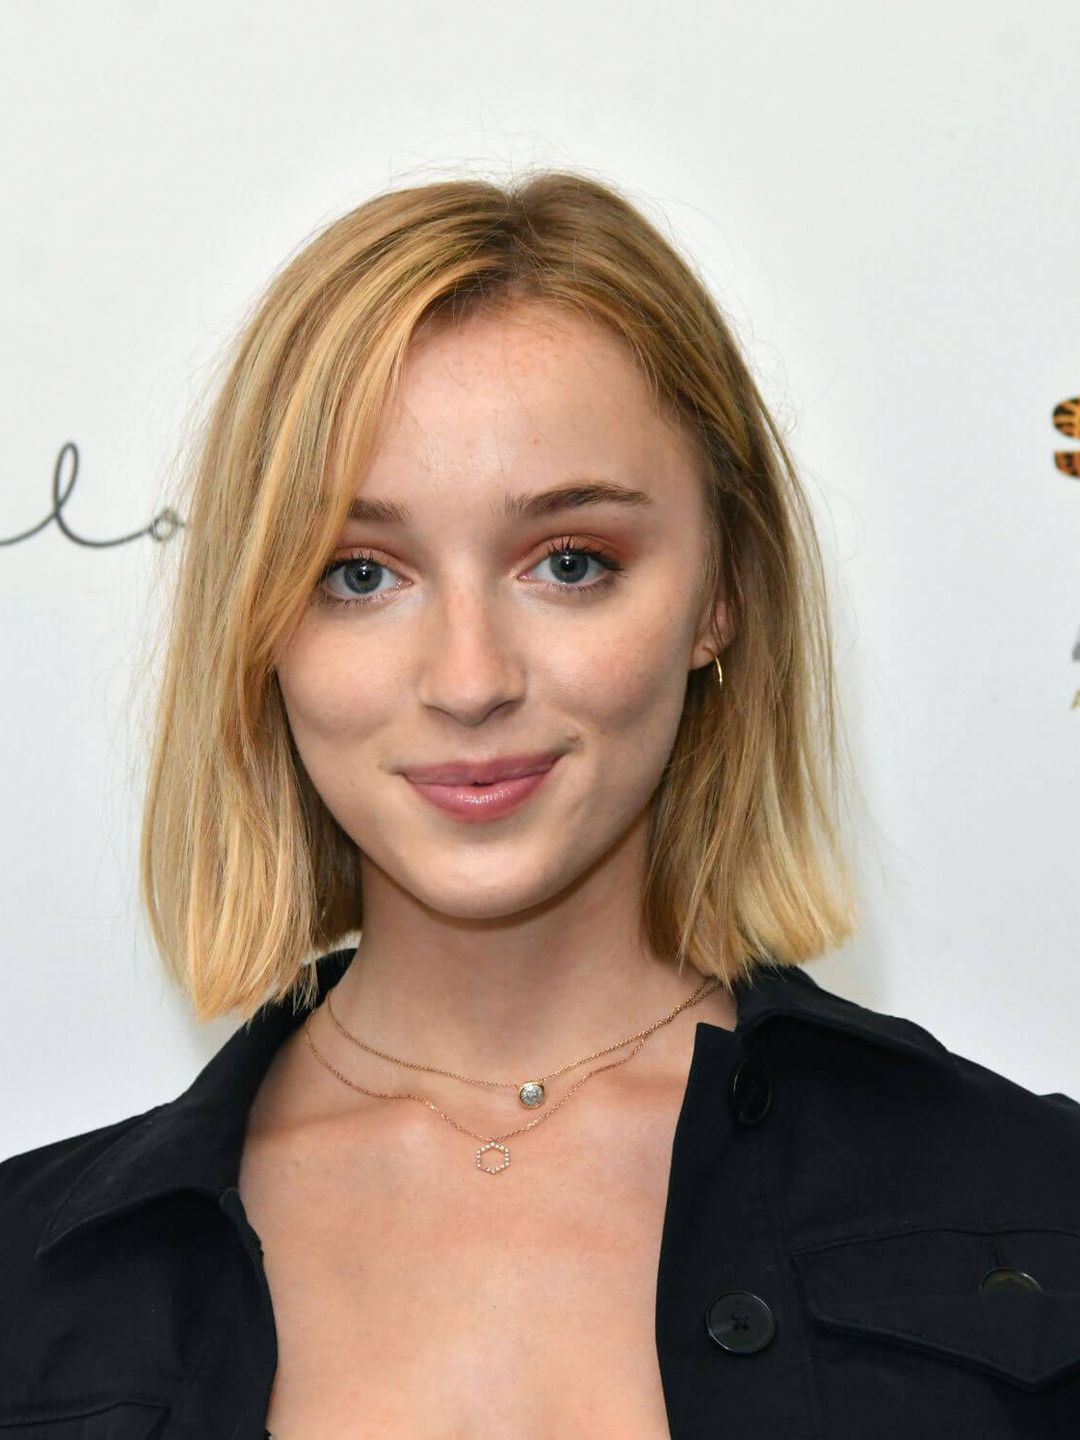 Phoebe Dynevor who is her mother